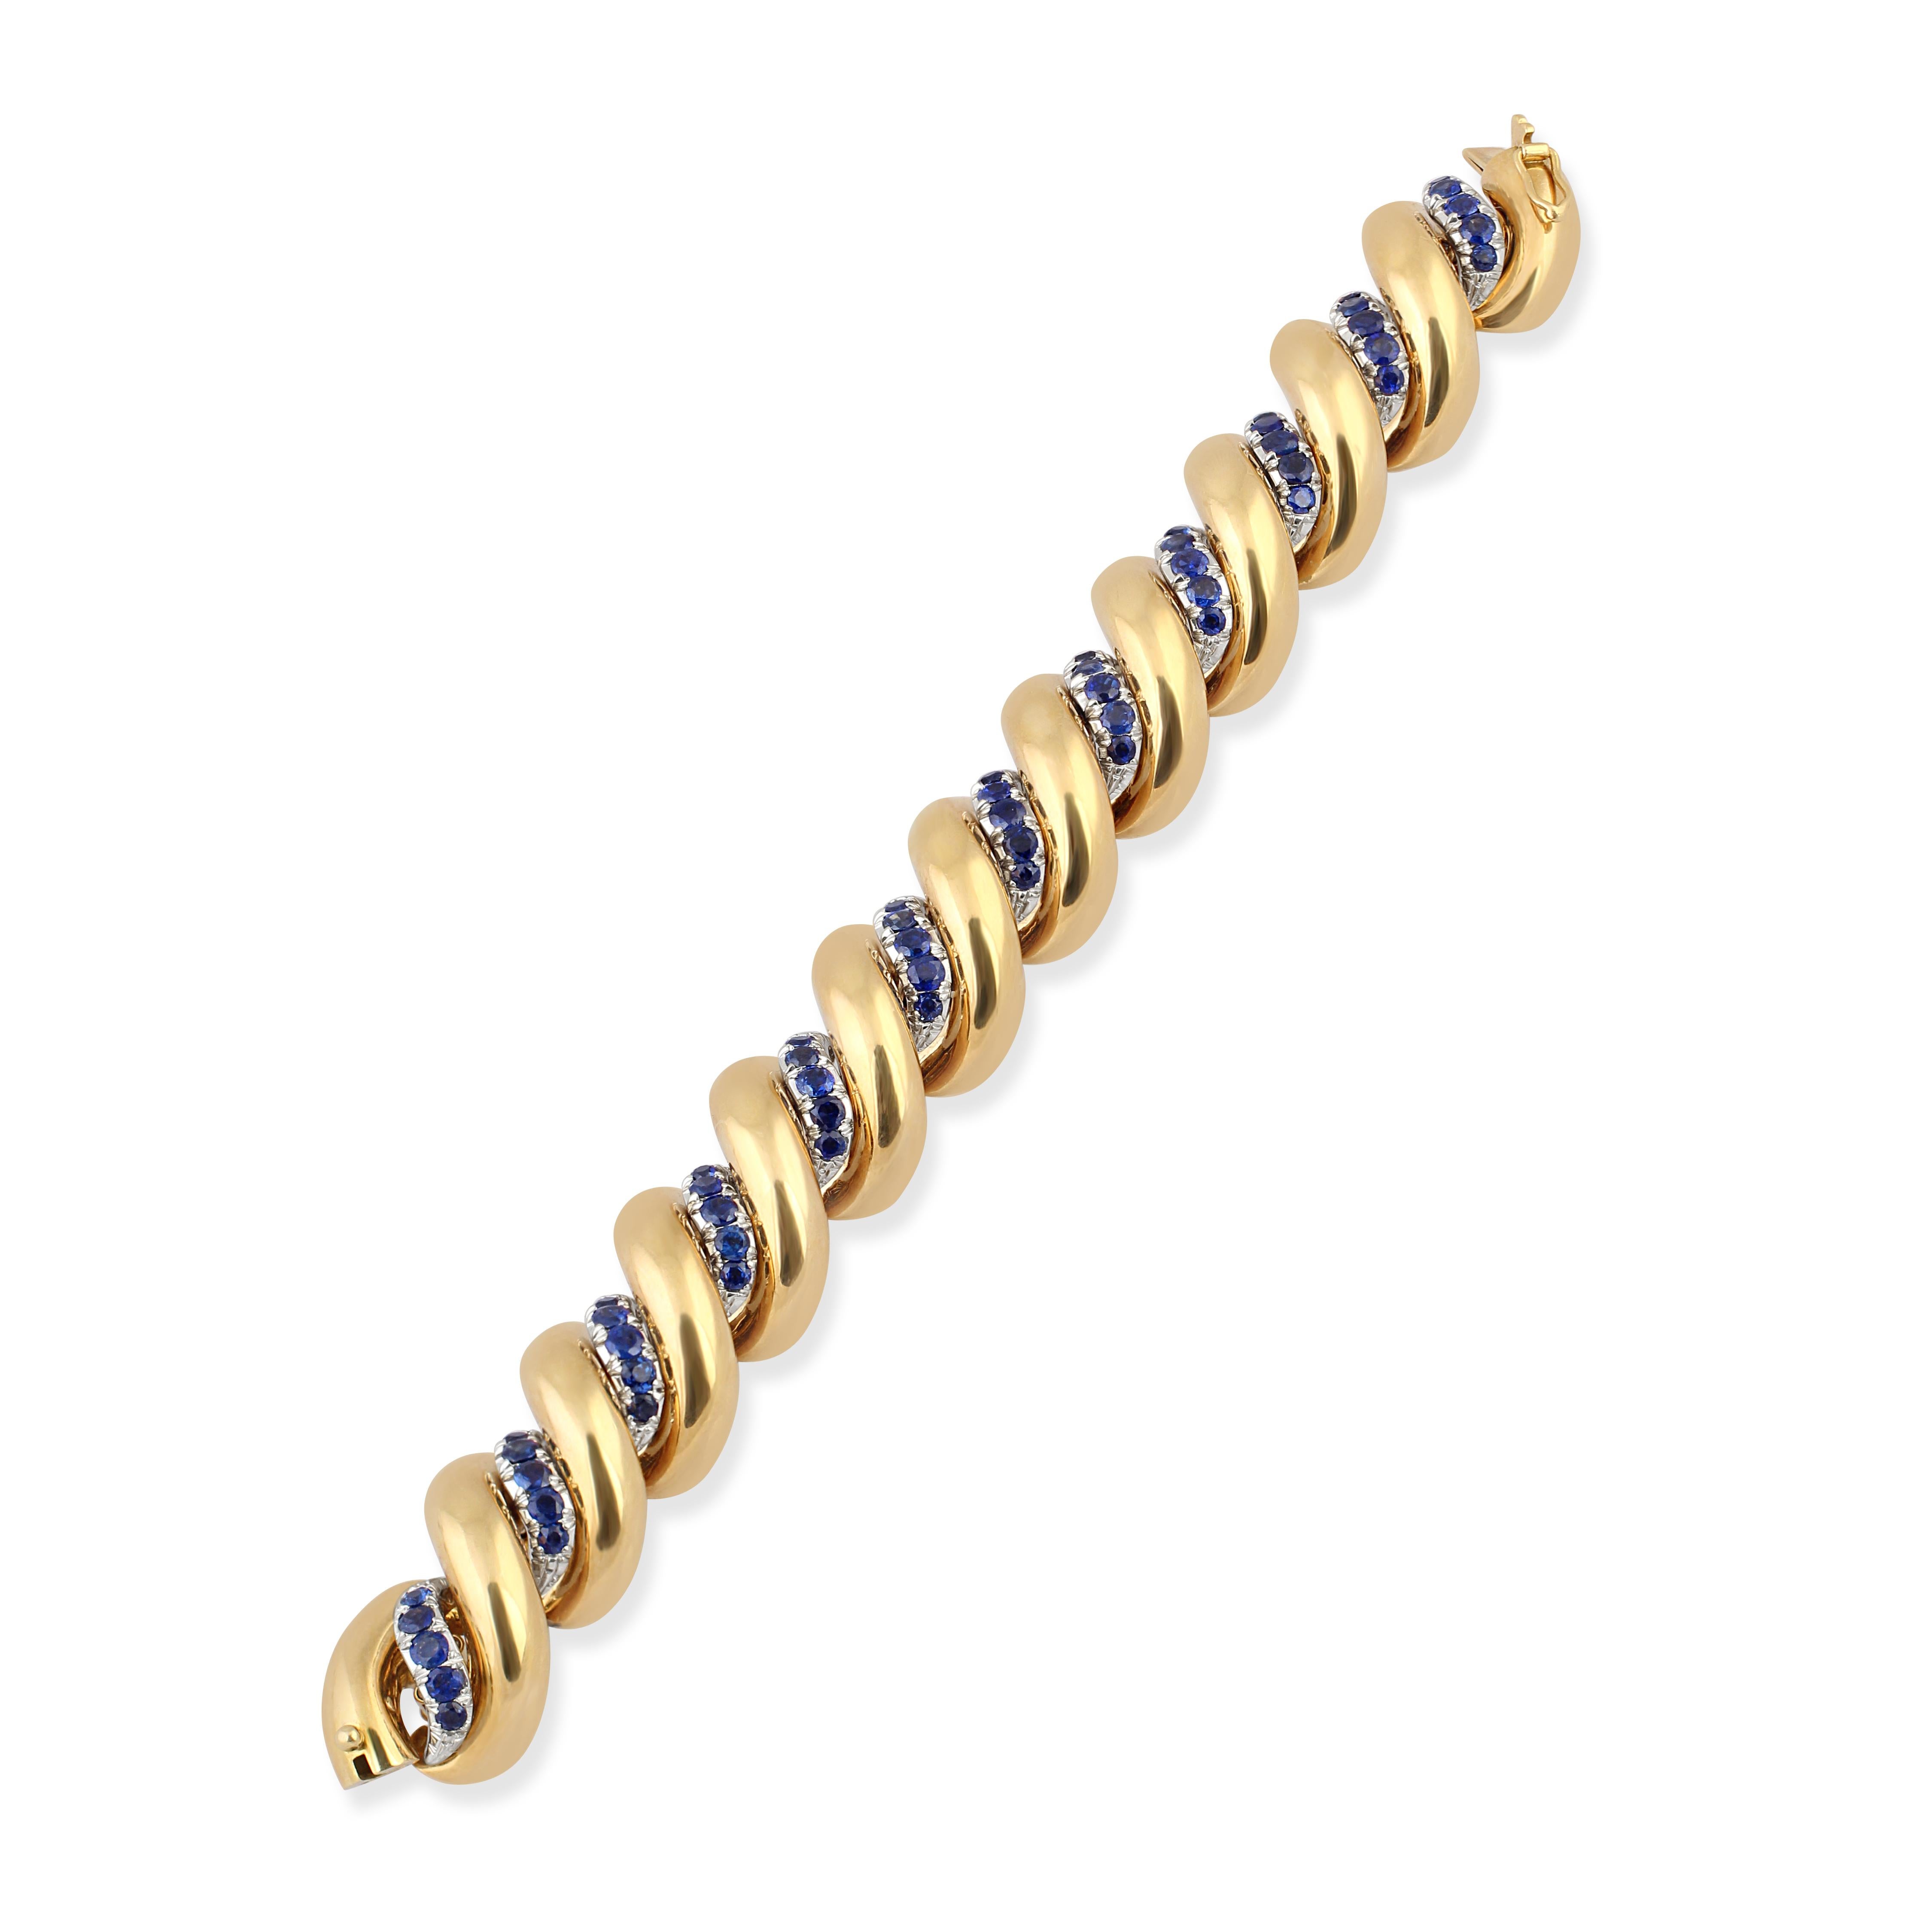 An 18k gold bracelet in a twisted design spaced with sapphires.

Signed: E.Nannini
Length: 19.5cm
Weight: 125gr
Origin: Milan, Italy
